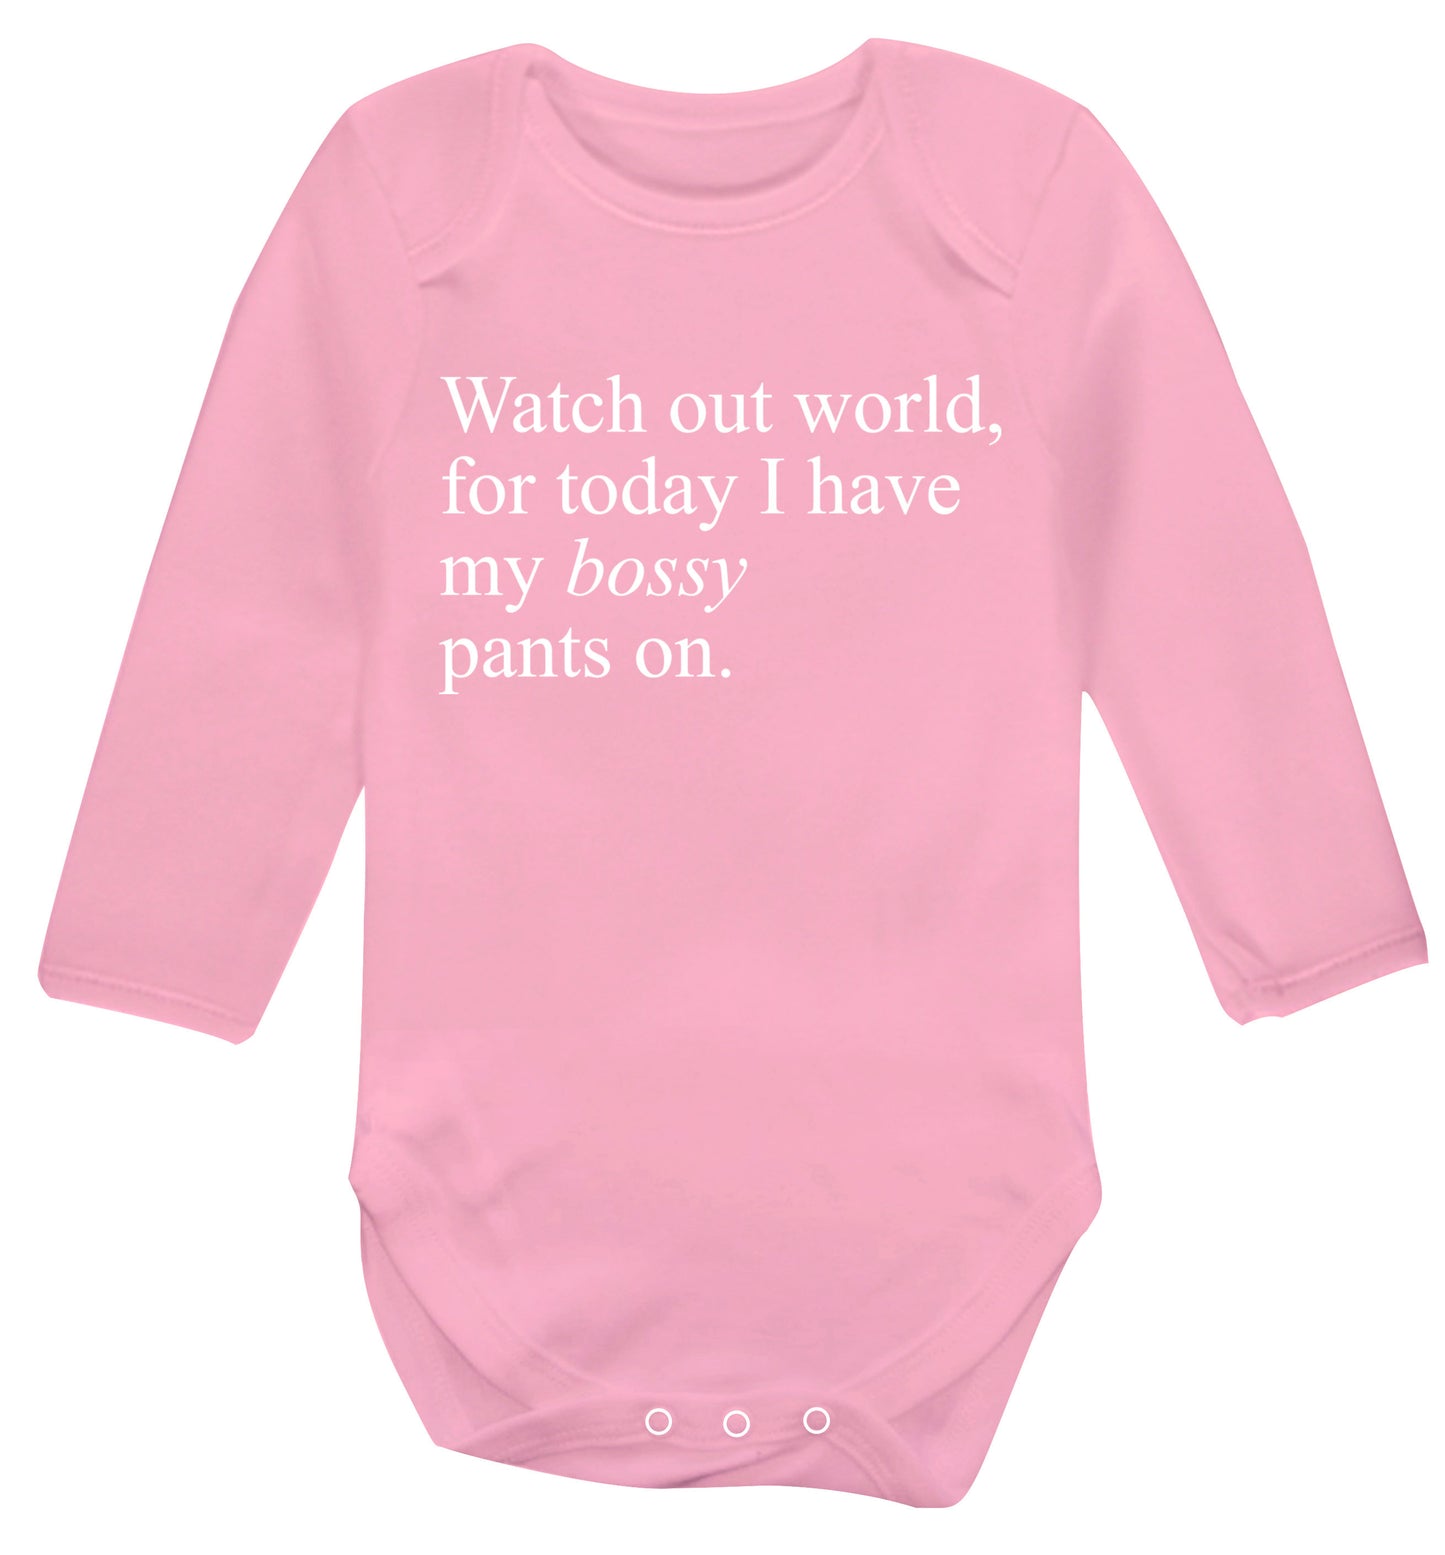 Watch out world, for today I have my bossy pants on Baby Vest long sleeved pale pink 6-12 months